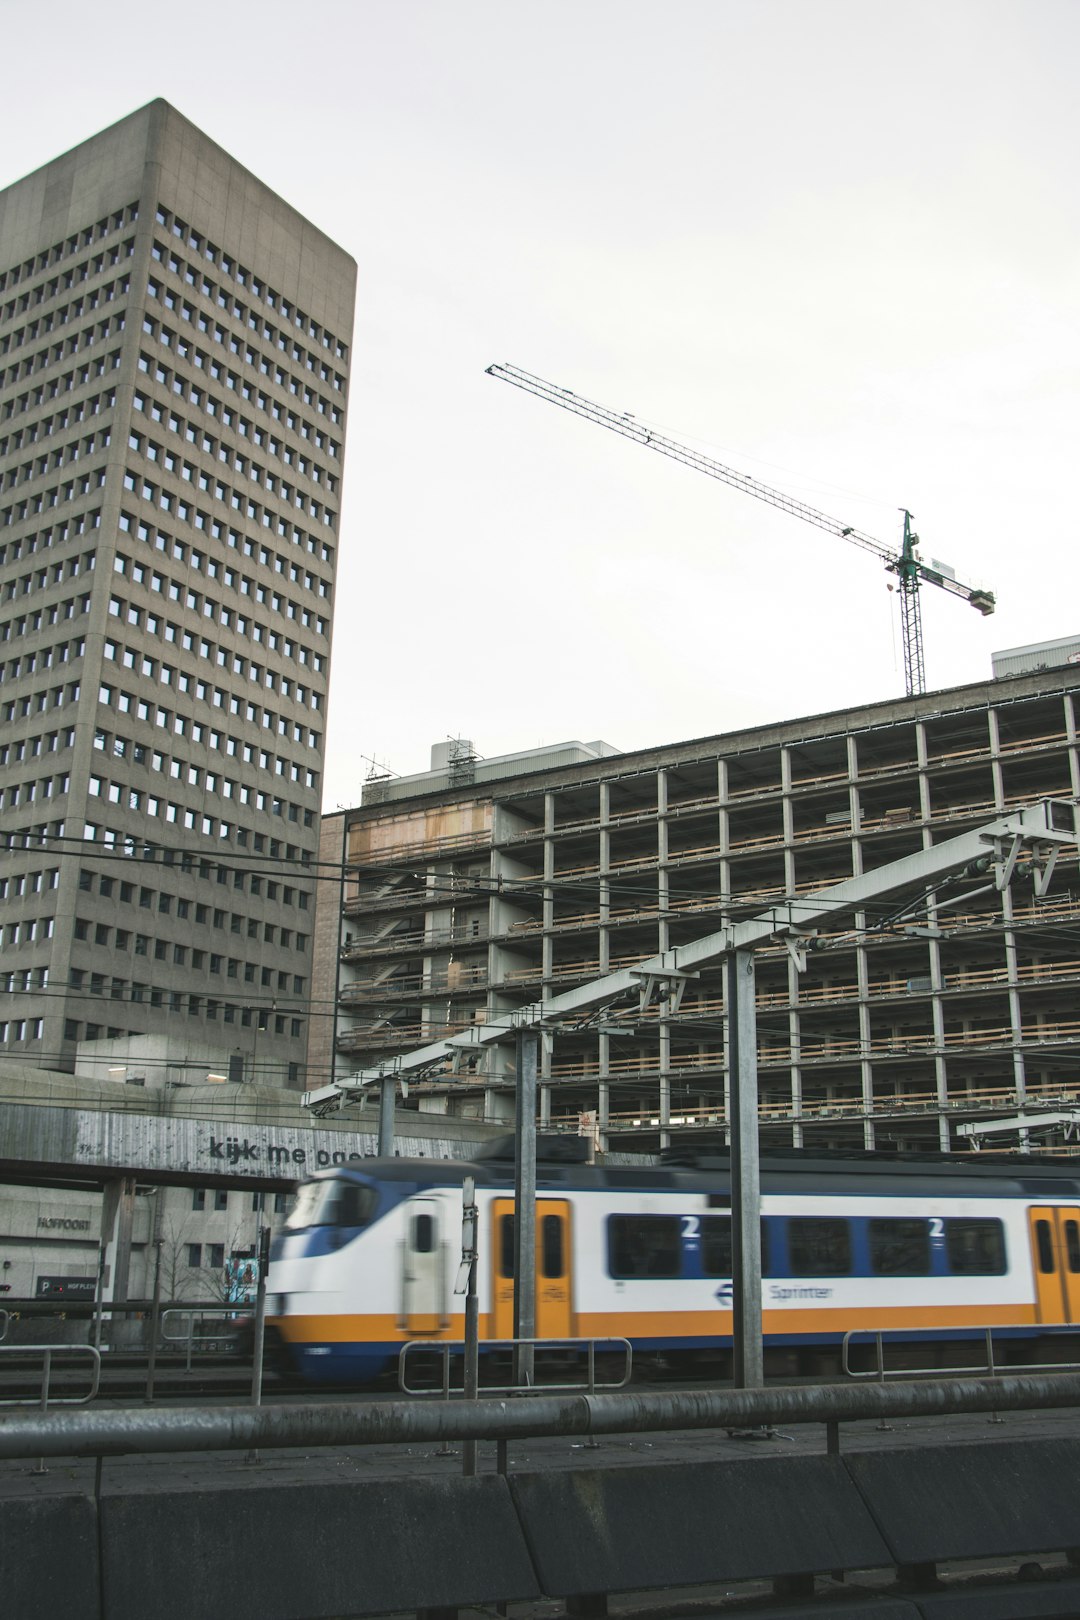 photo of white and brown train near concrete buildings during daytime